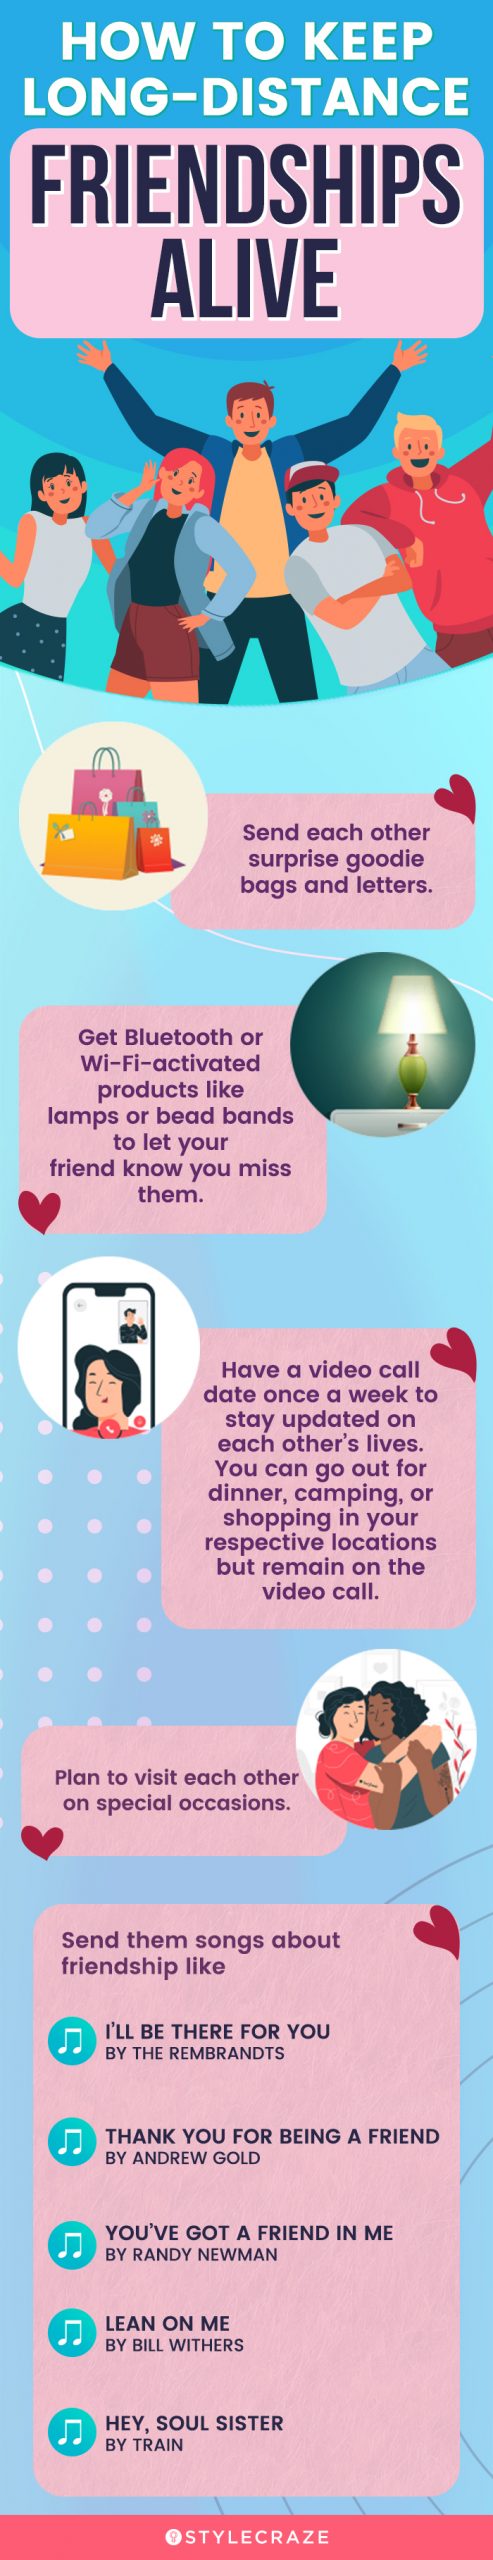 how to keep long distance friendships alive [infographic]